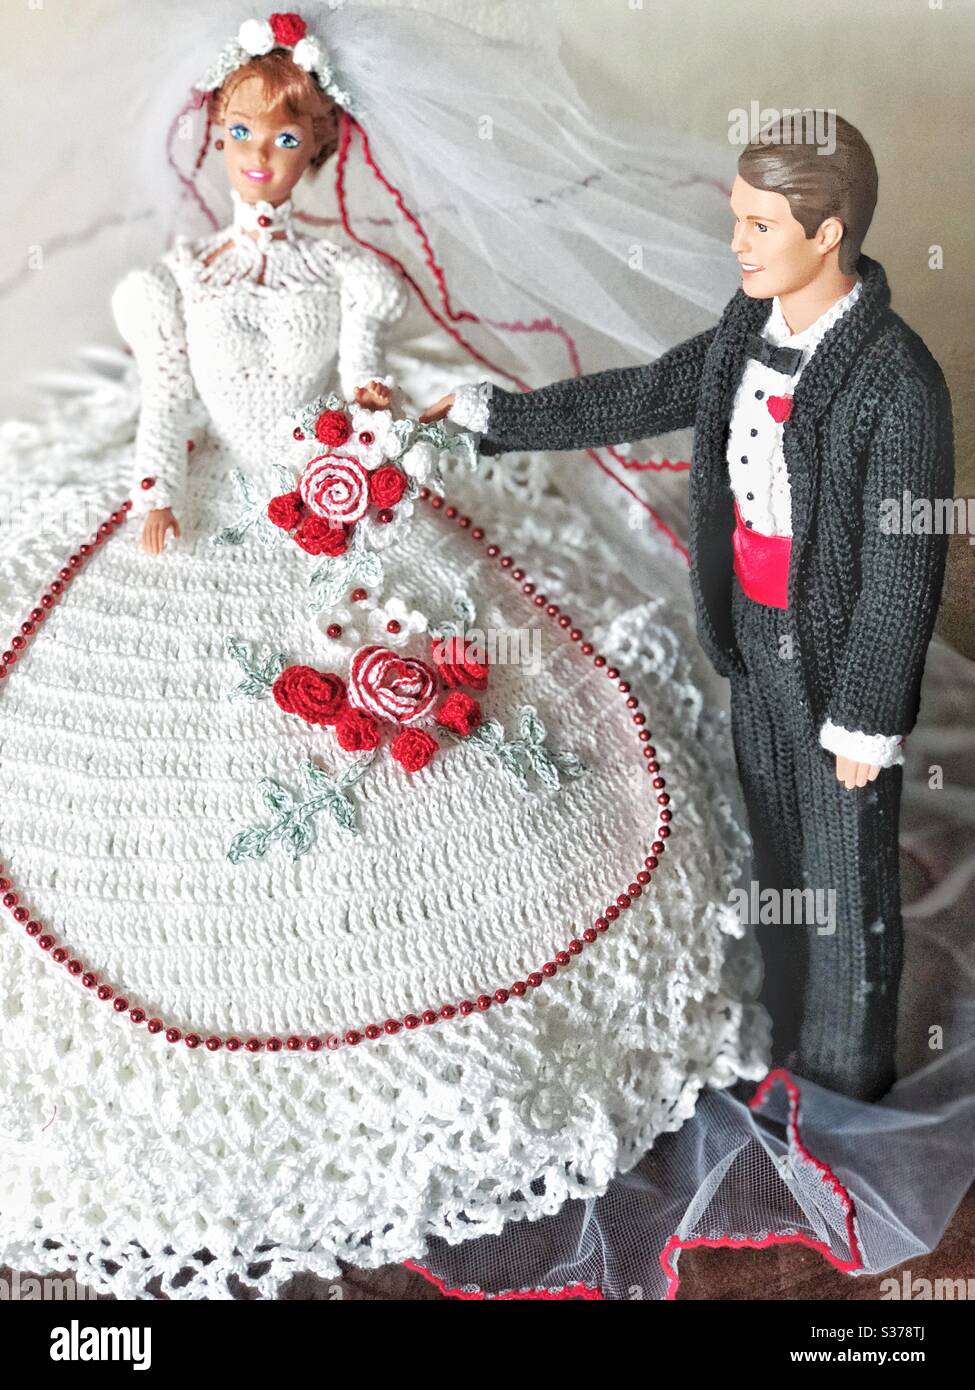 Ken and Barbie in elaborate crocheted wedding outfits Stock Photo